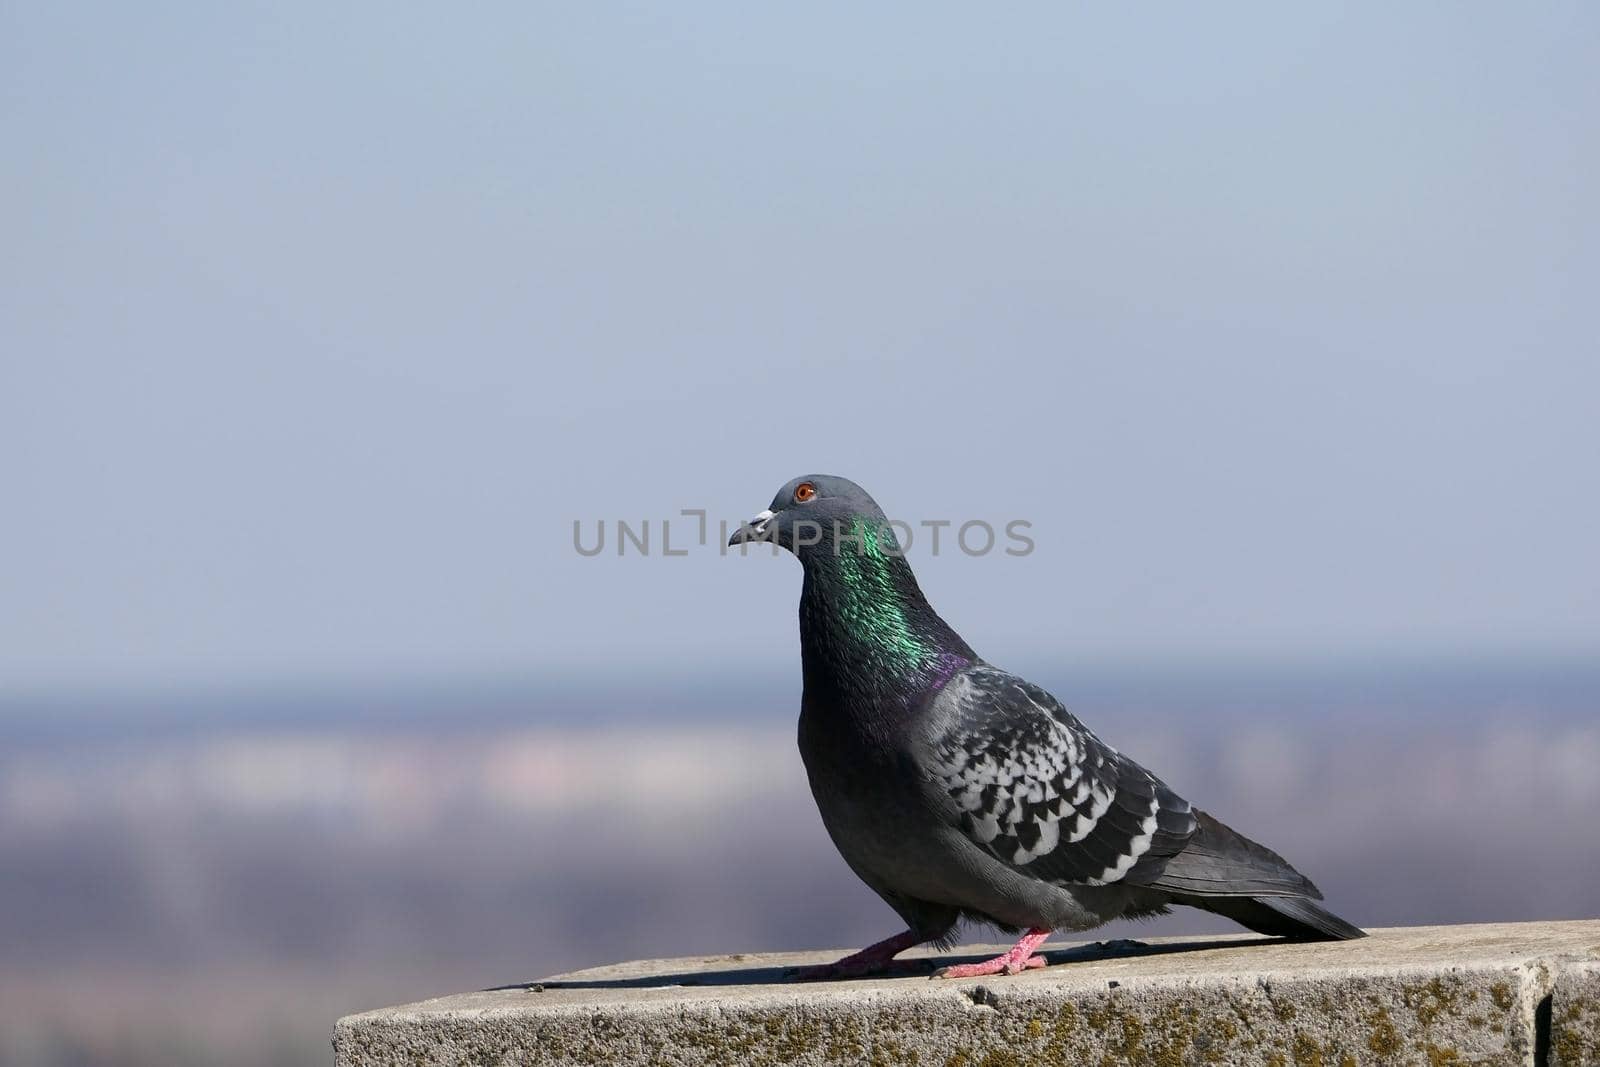 A beautiful pigeon in its natural habitat. Nature and birds. by Olga26